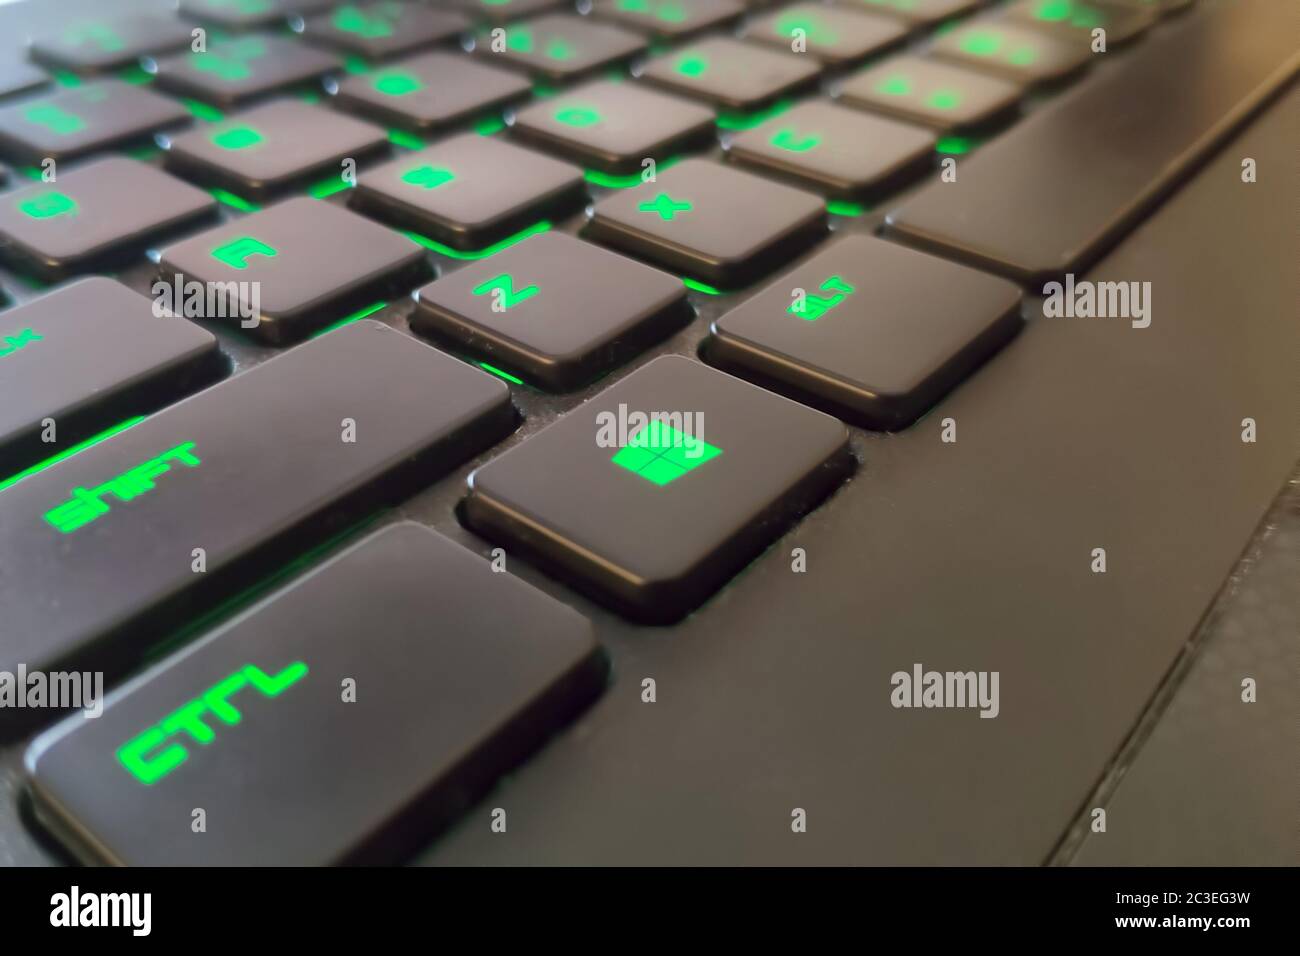 Moscow, Russia - June 04, 2019: green Windows button on a keyboard with lighting. Close up of shift, ctrl, alt Stock Photo